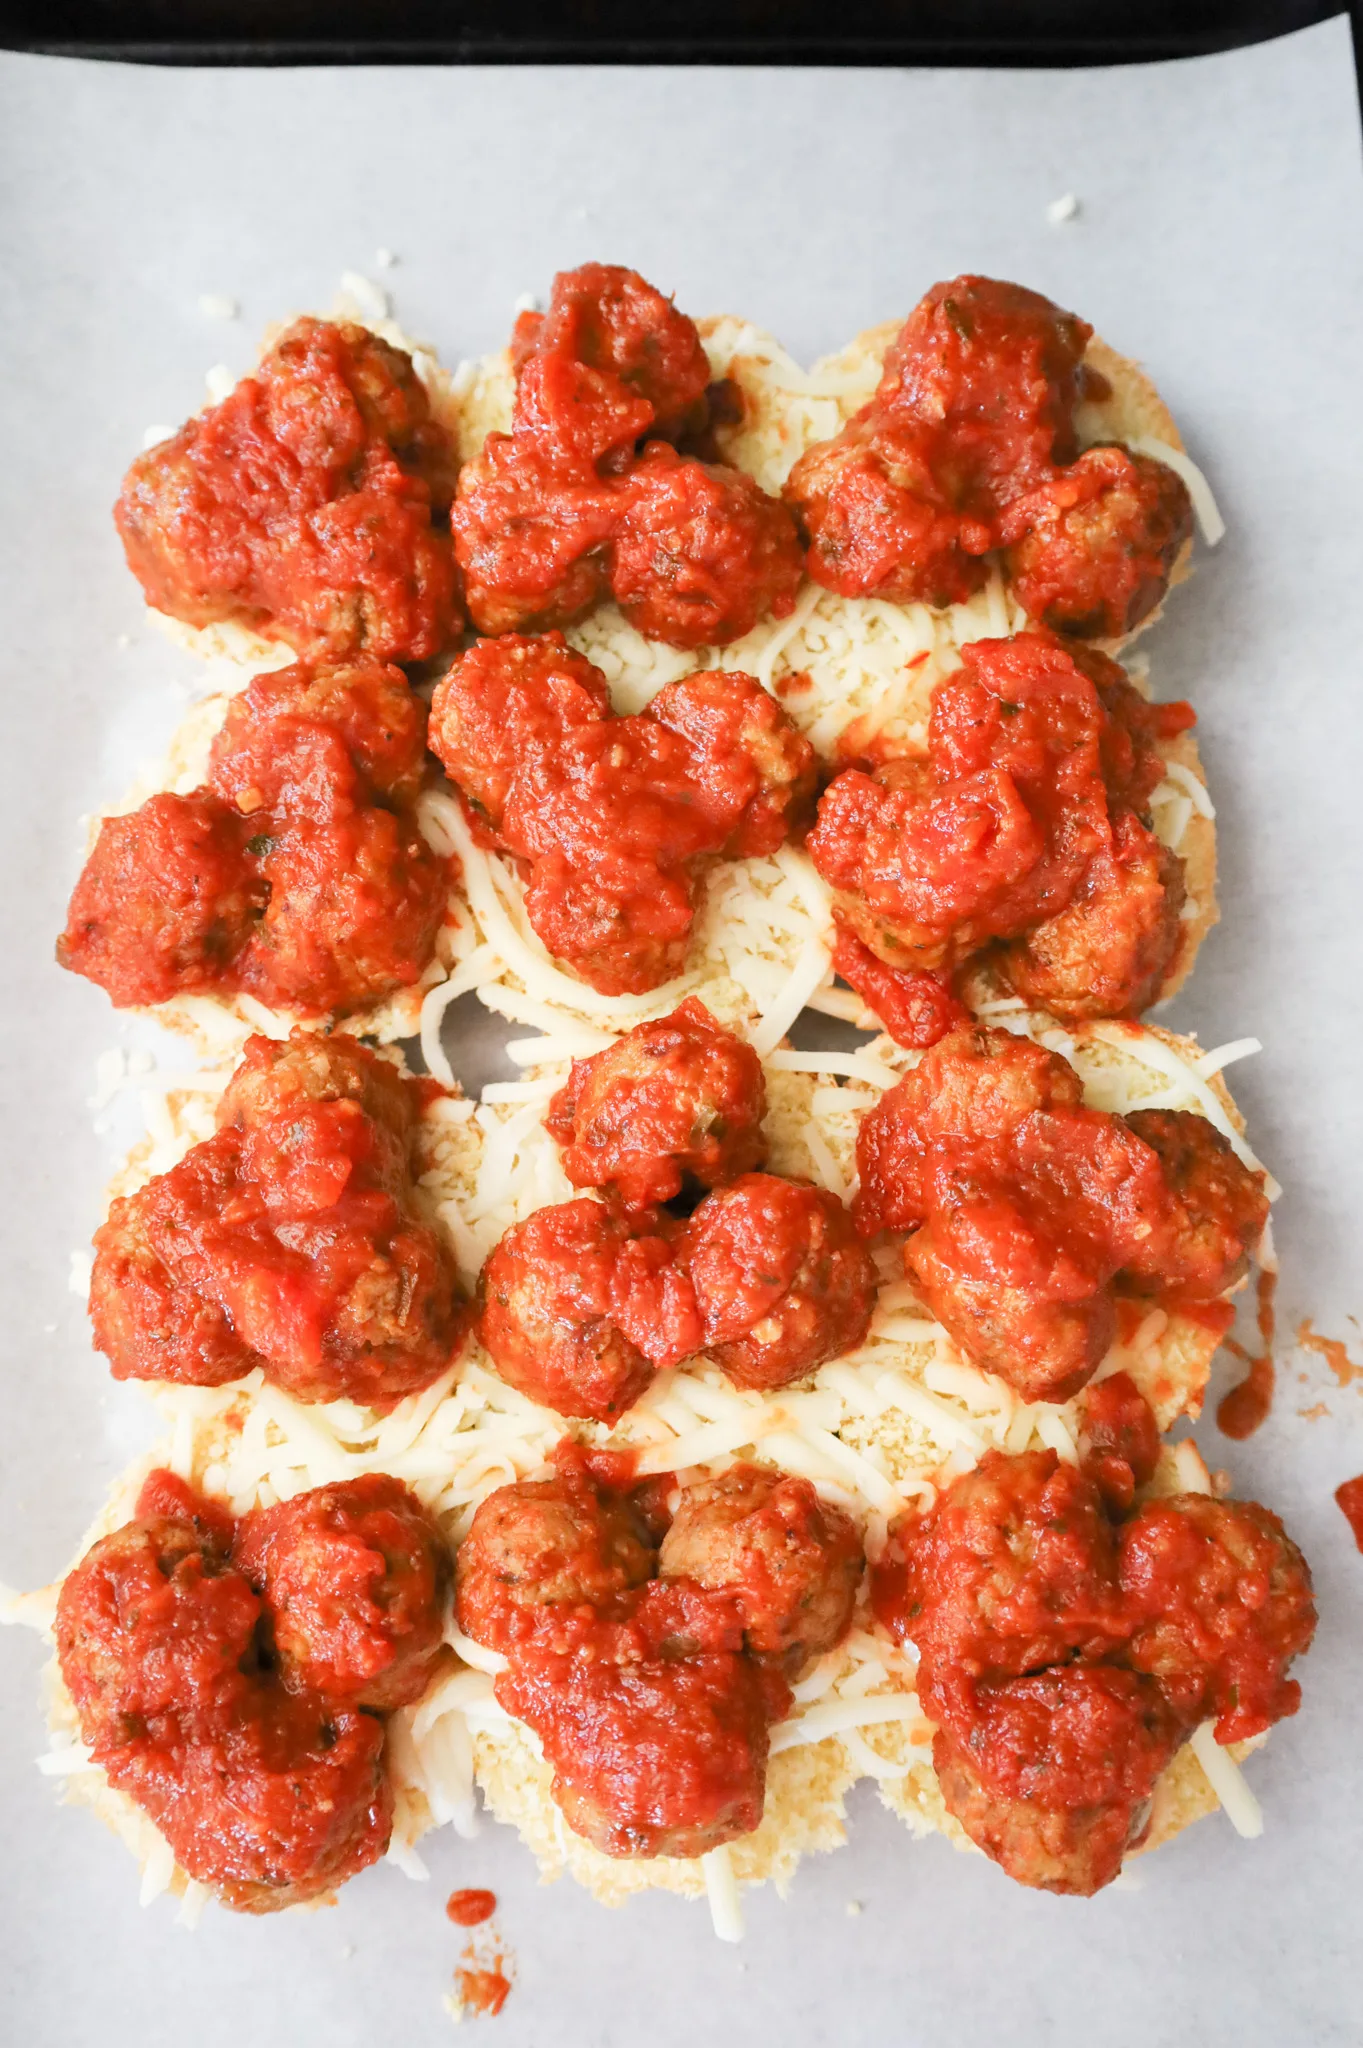 meatballs and shredded cheese on top of dinner rolls on a baking sheet